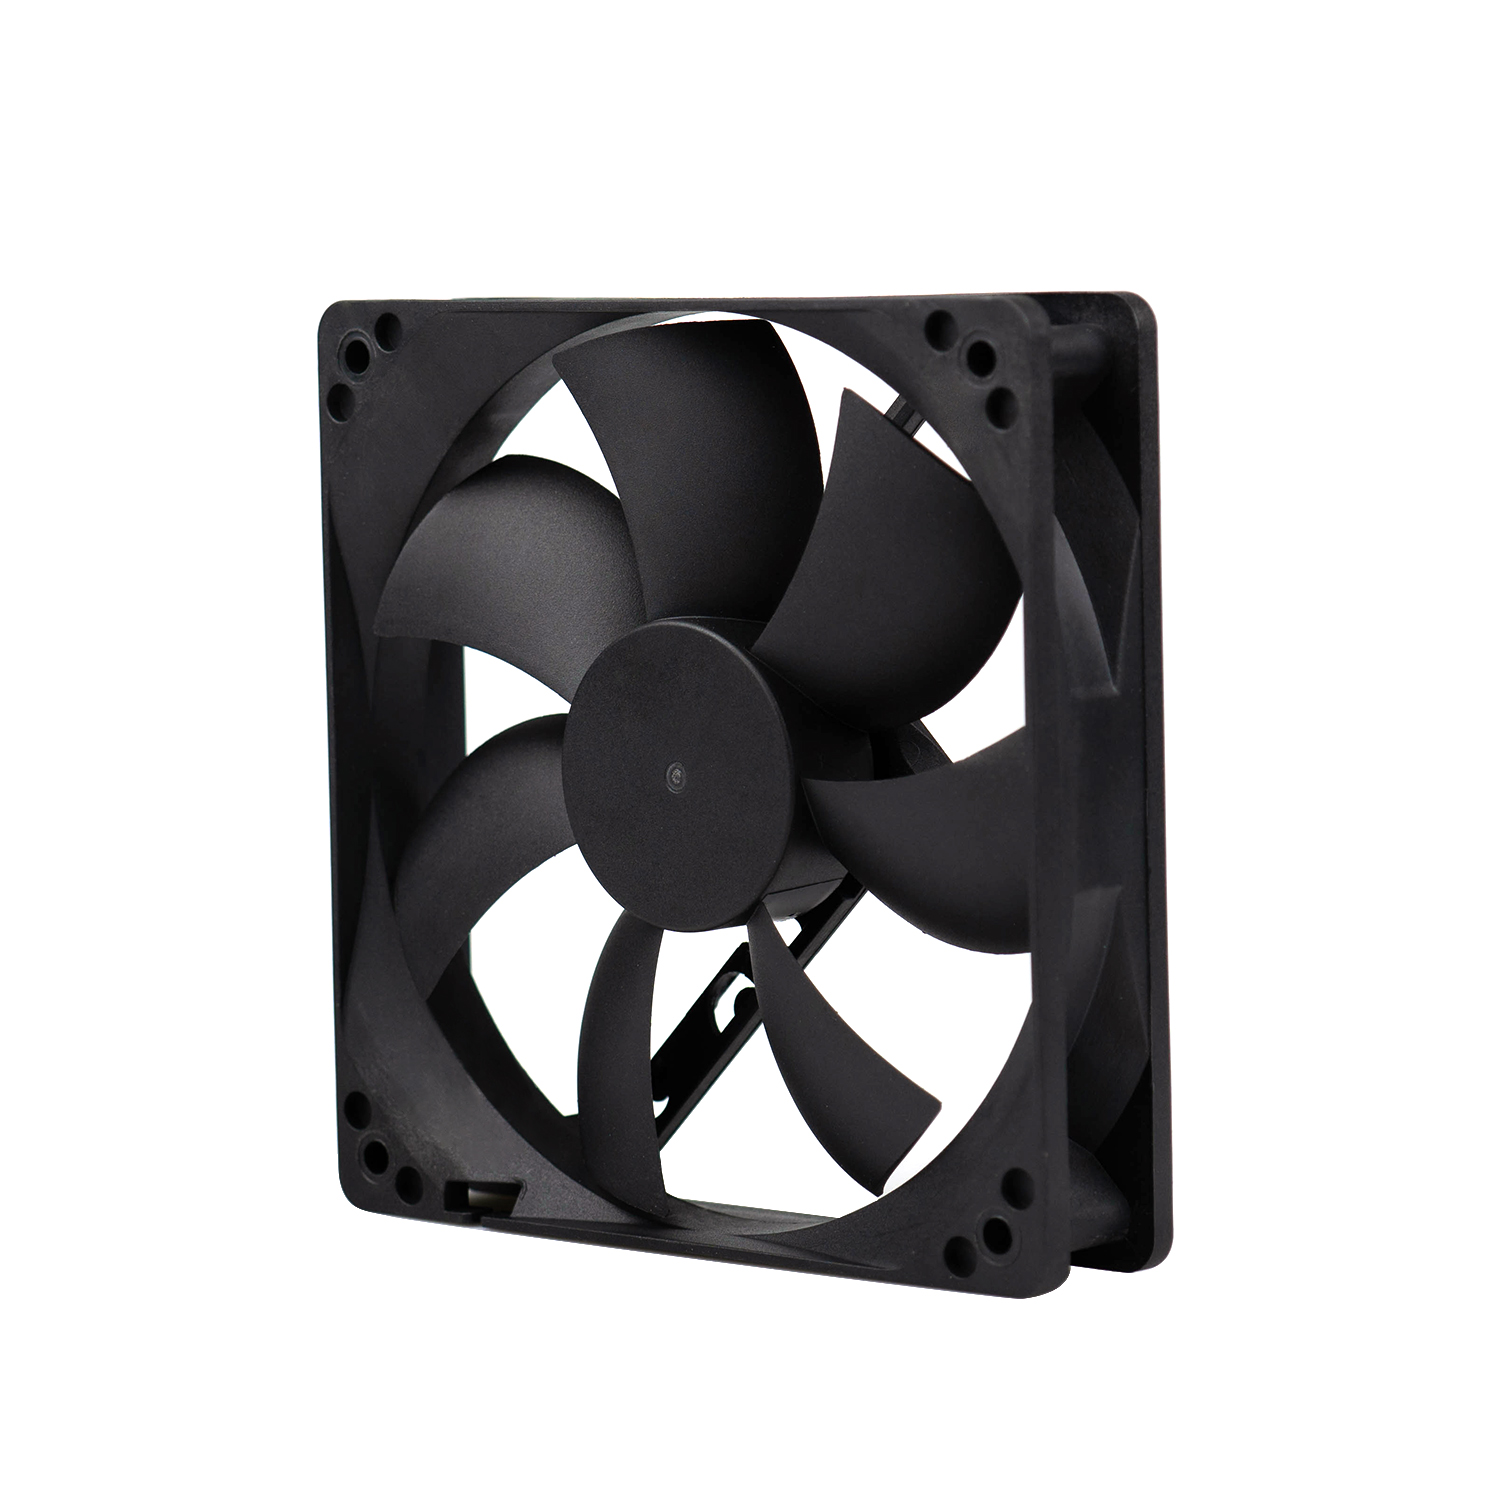 12025 24V brushless DC axial fan high cfm large